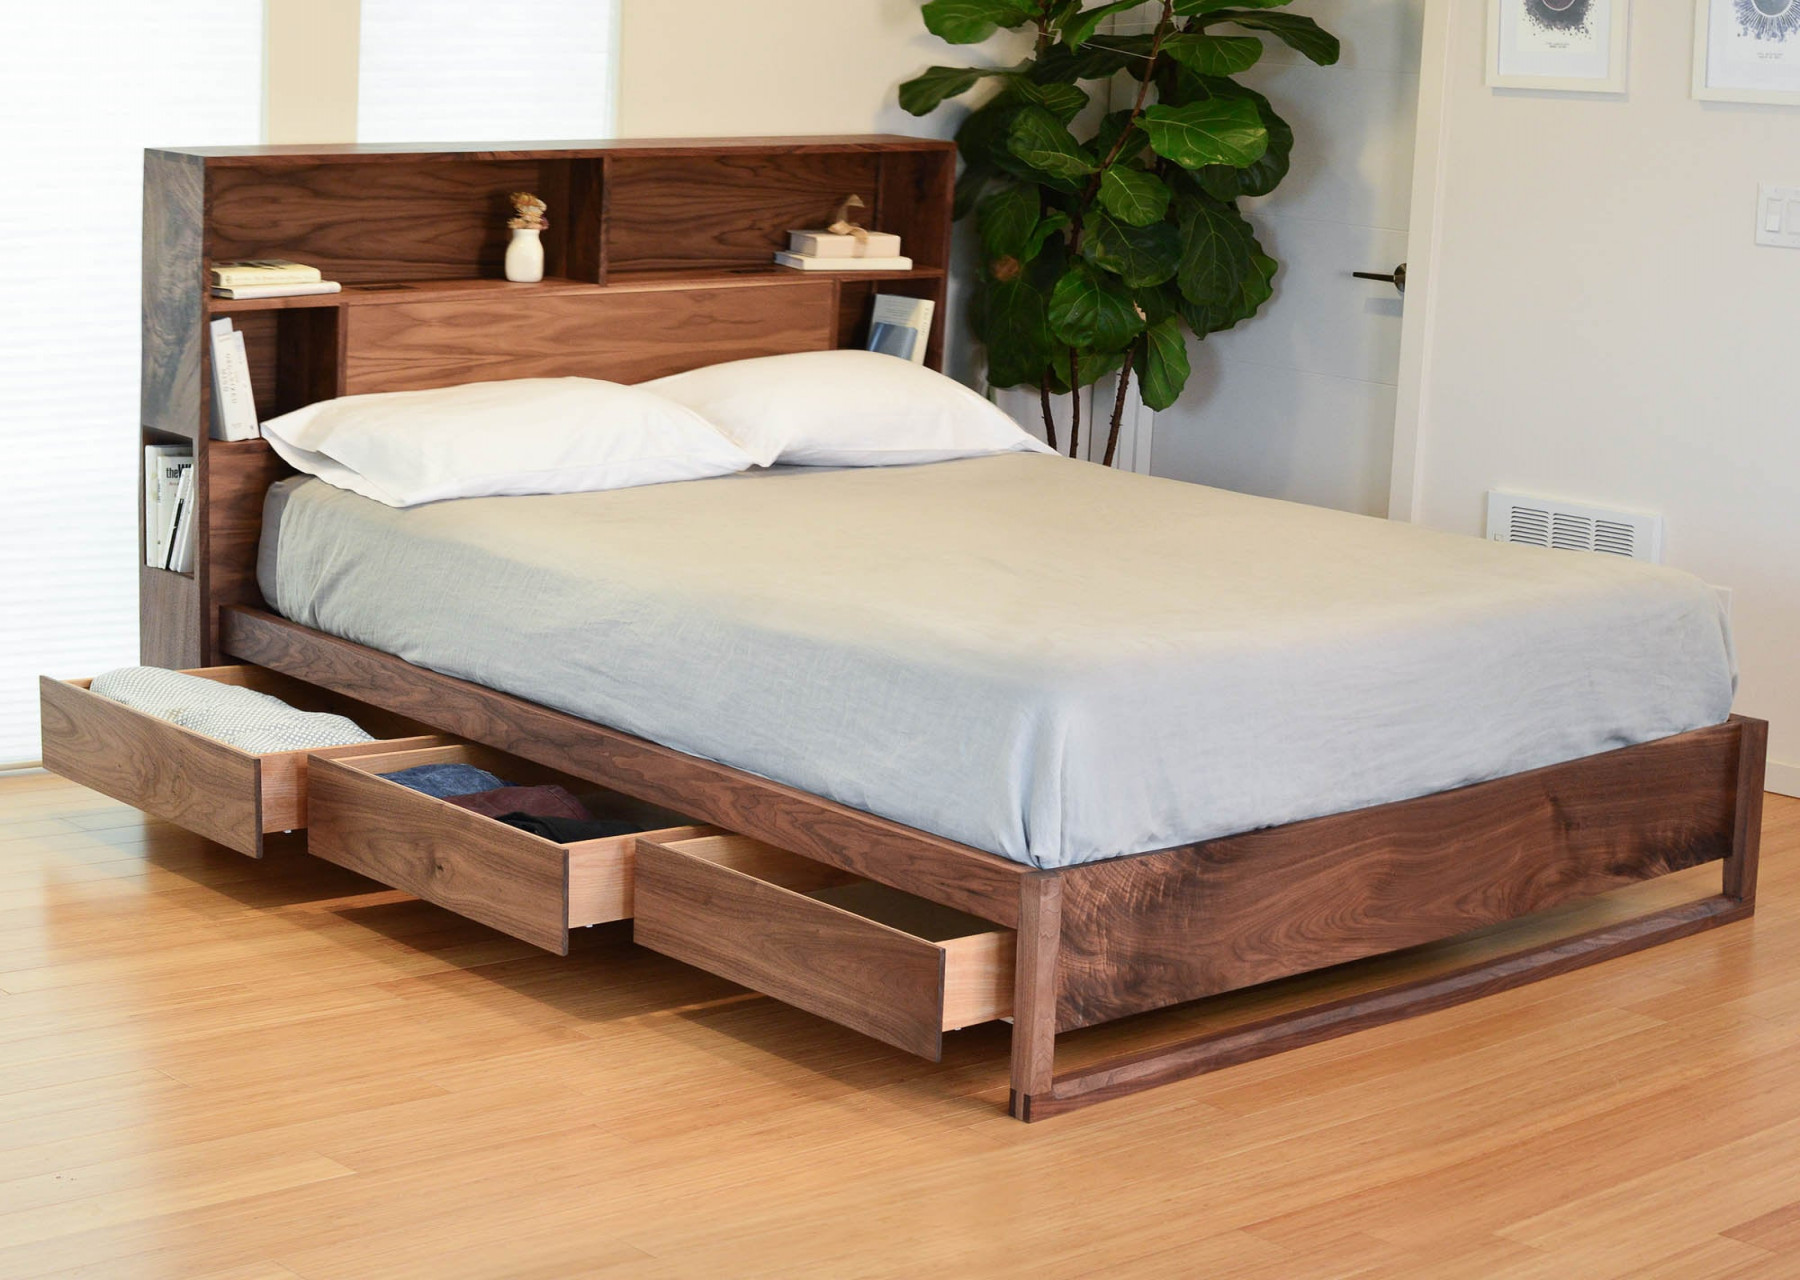 King Bed Frame With Storage And Headboard